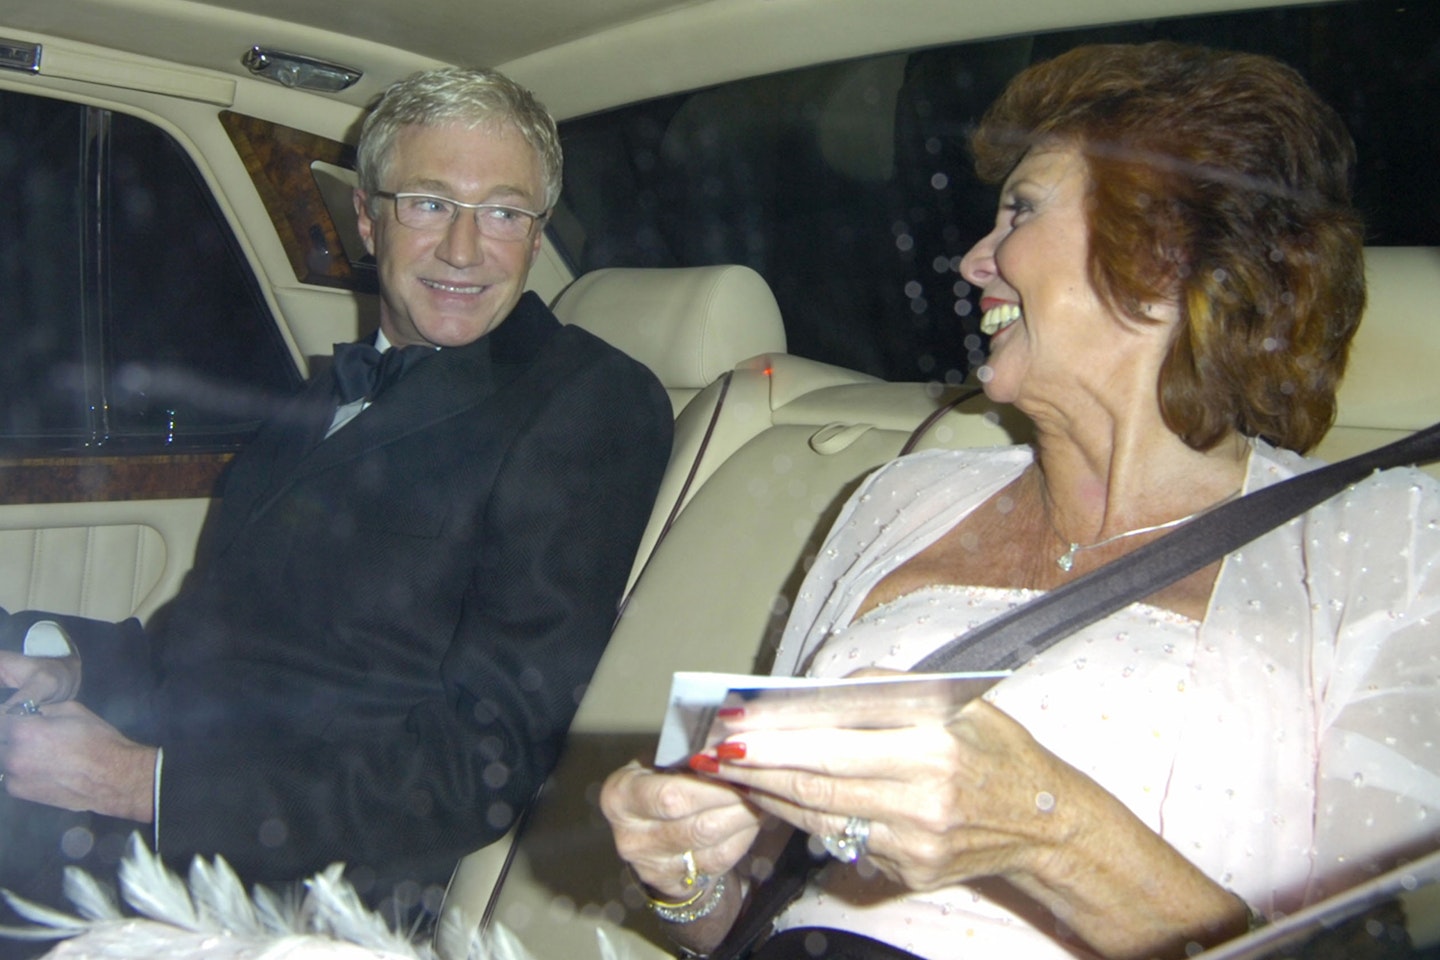 blind-date-coming-back-screens-year-reboot-cilla-black-paul-ogrady-host-vicky-pattison-reboot-revival-itv-channel-5